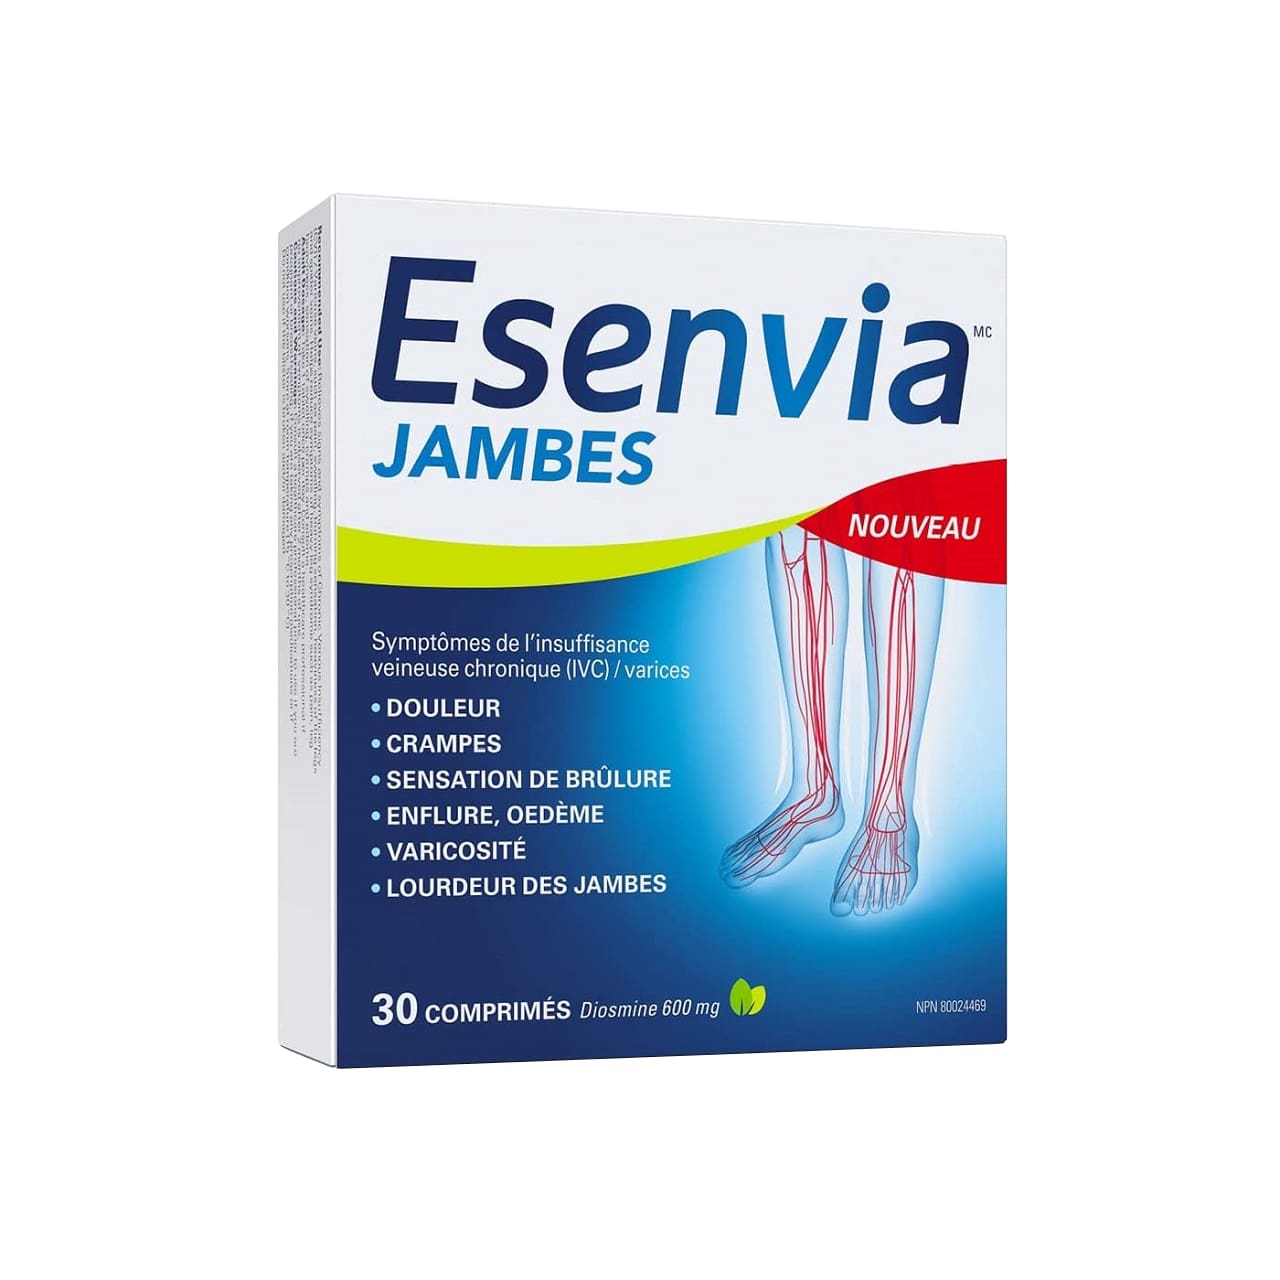 Product label for Esenvia Legs (30 tablets) in French